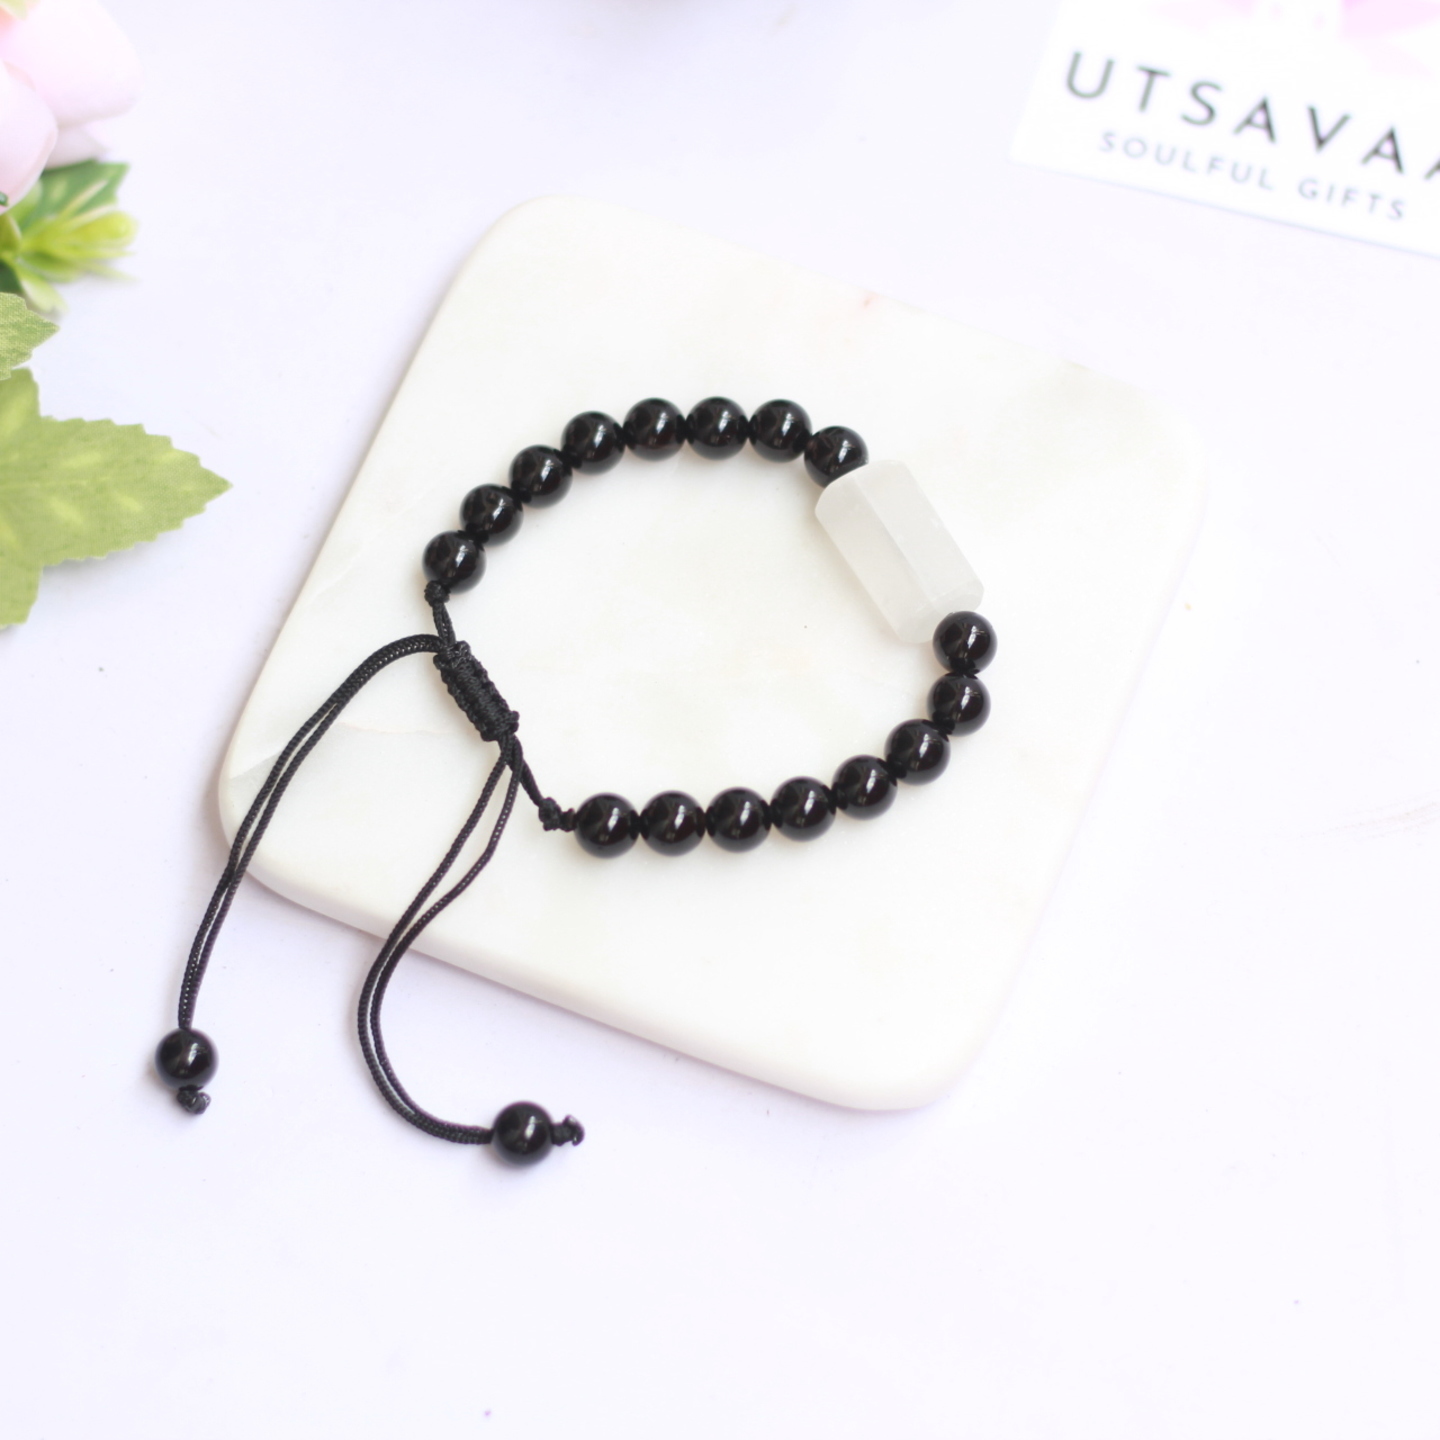 Aura Cleansing and Protection Bracelet - Utsavaa